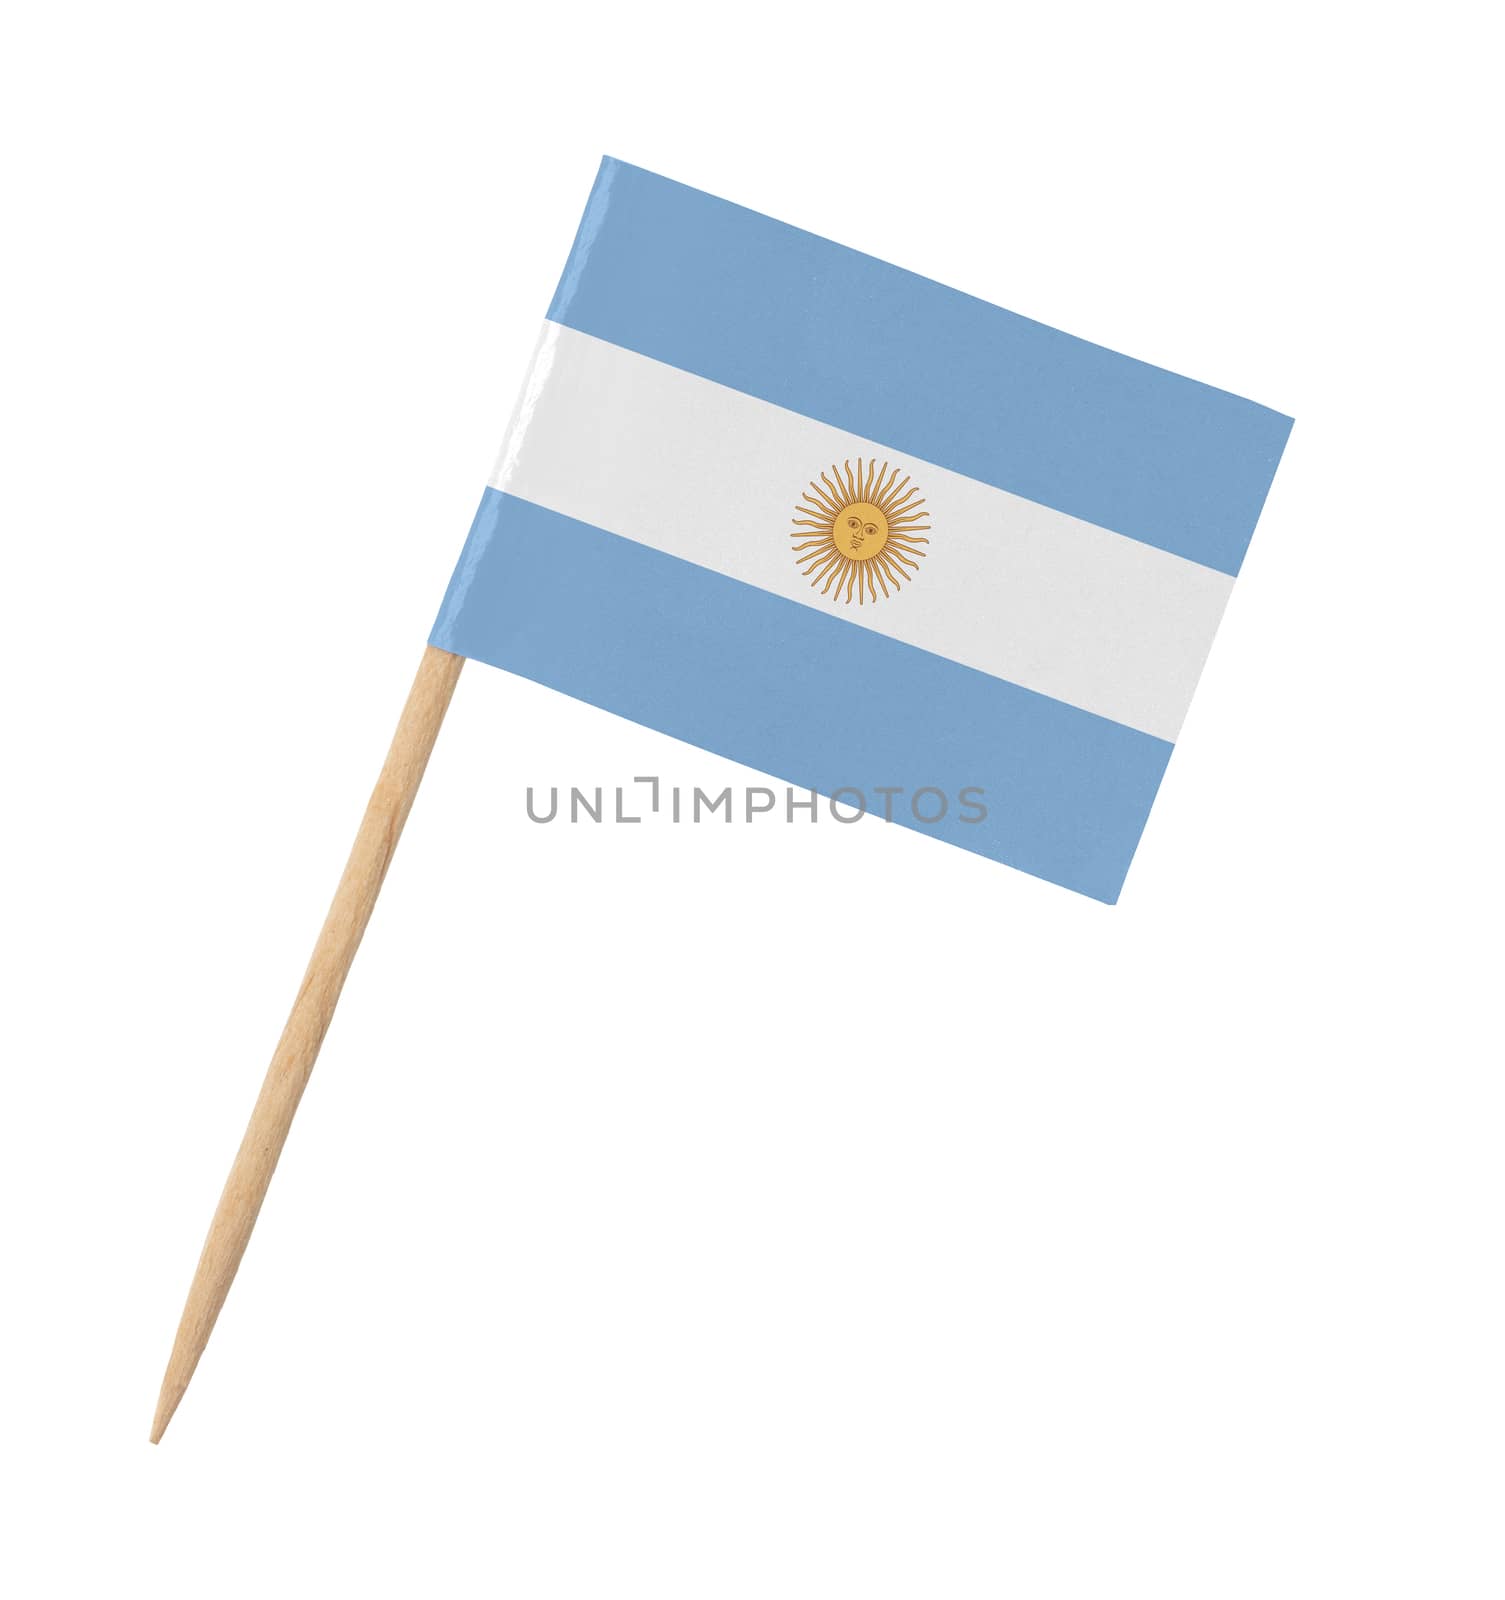 Small paper Argentinian flag on wooden stick, isolated on white